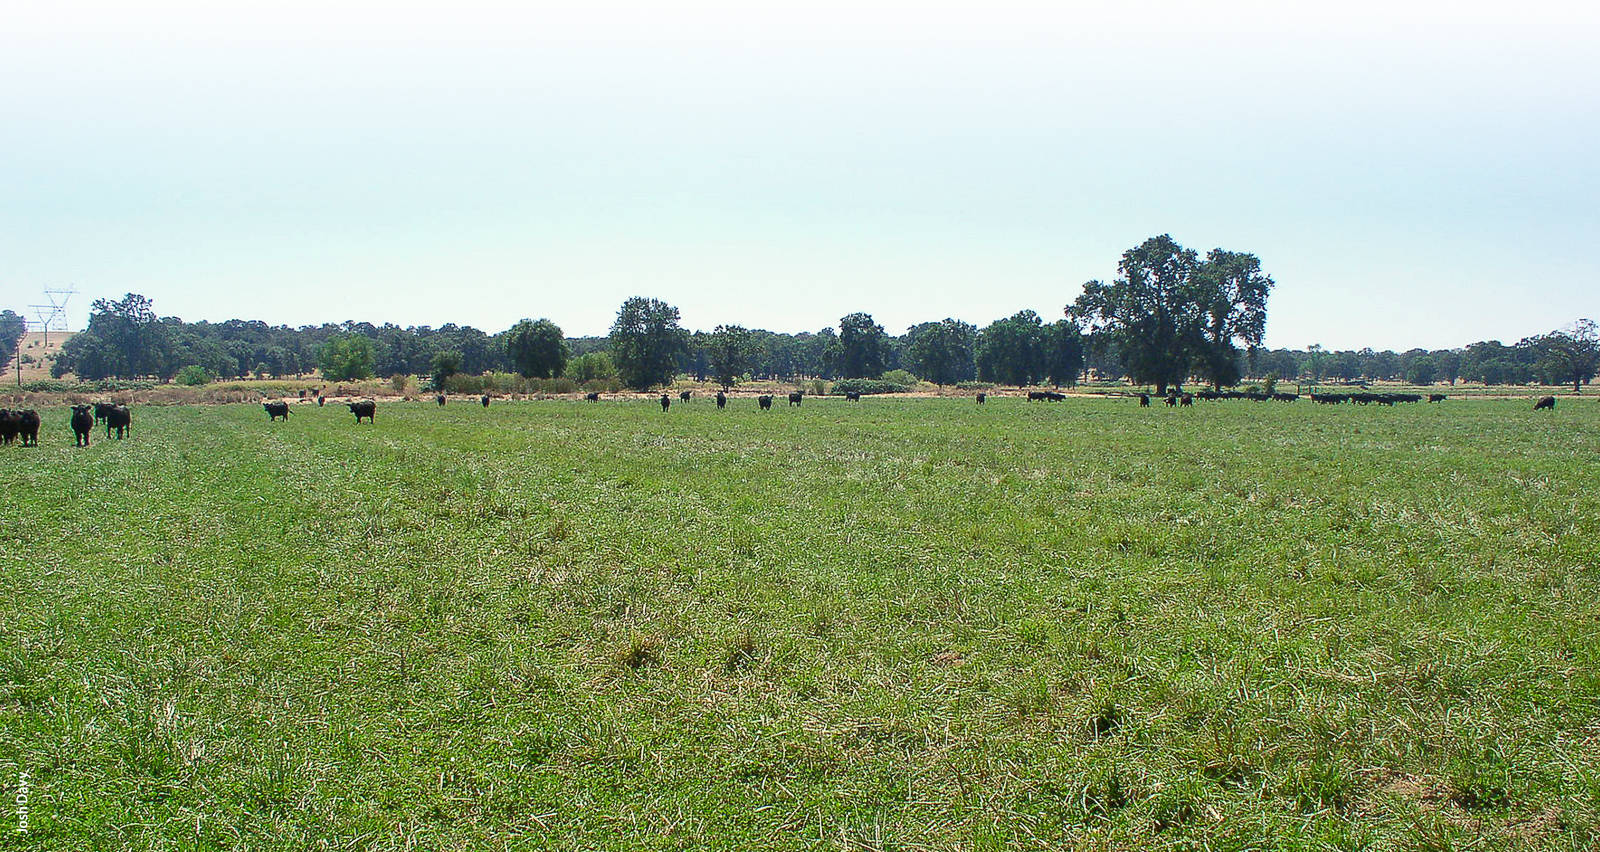 Cattle grazed free-choice on irrigated pasture during both trials.